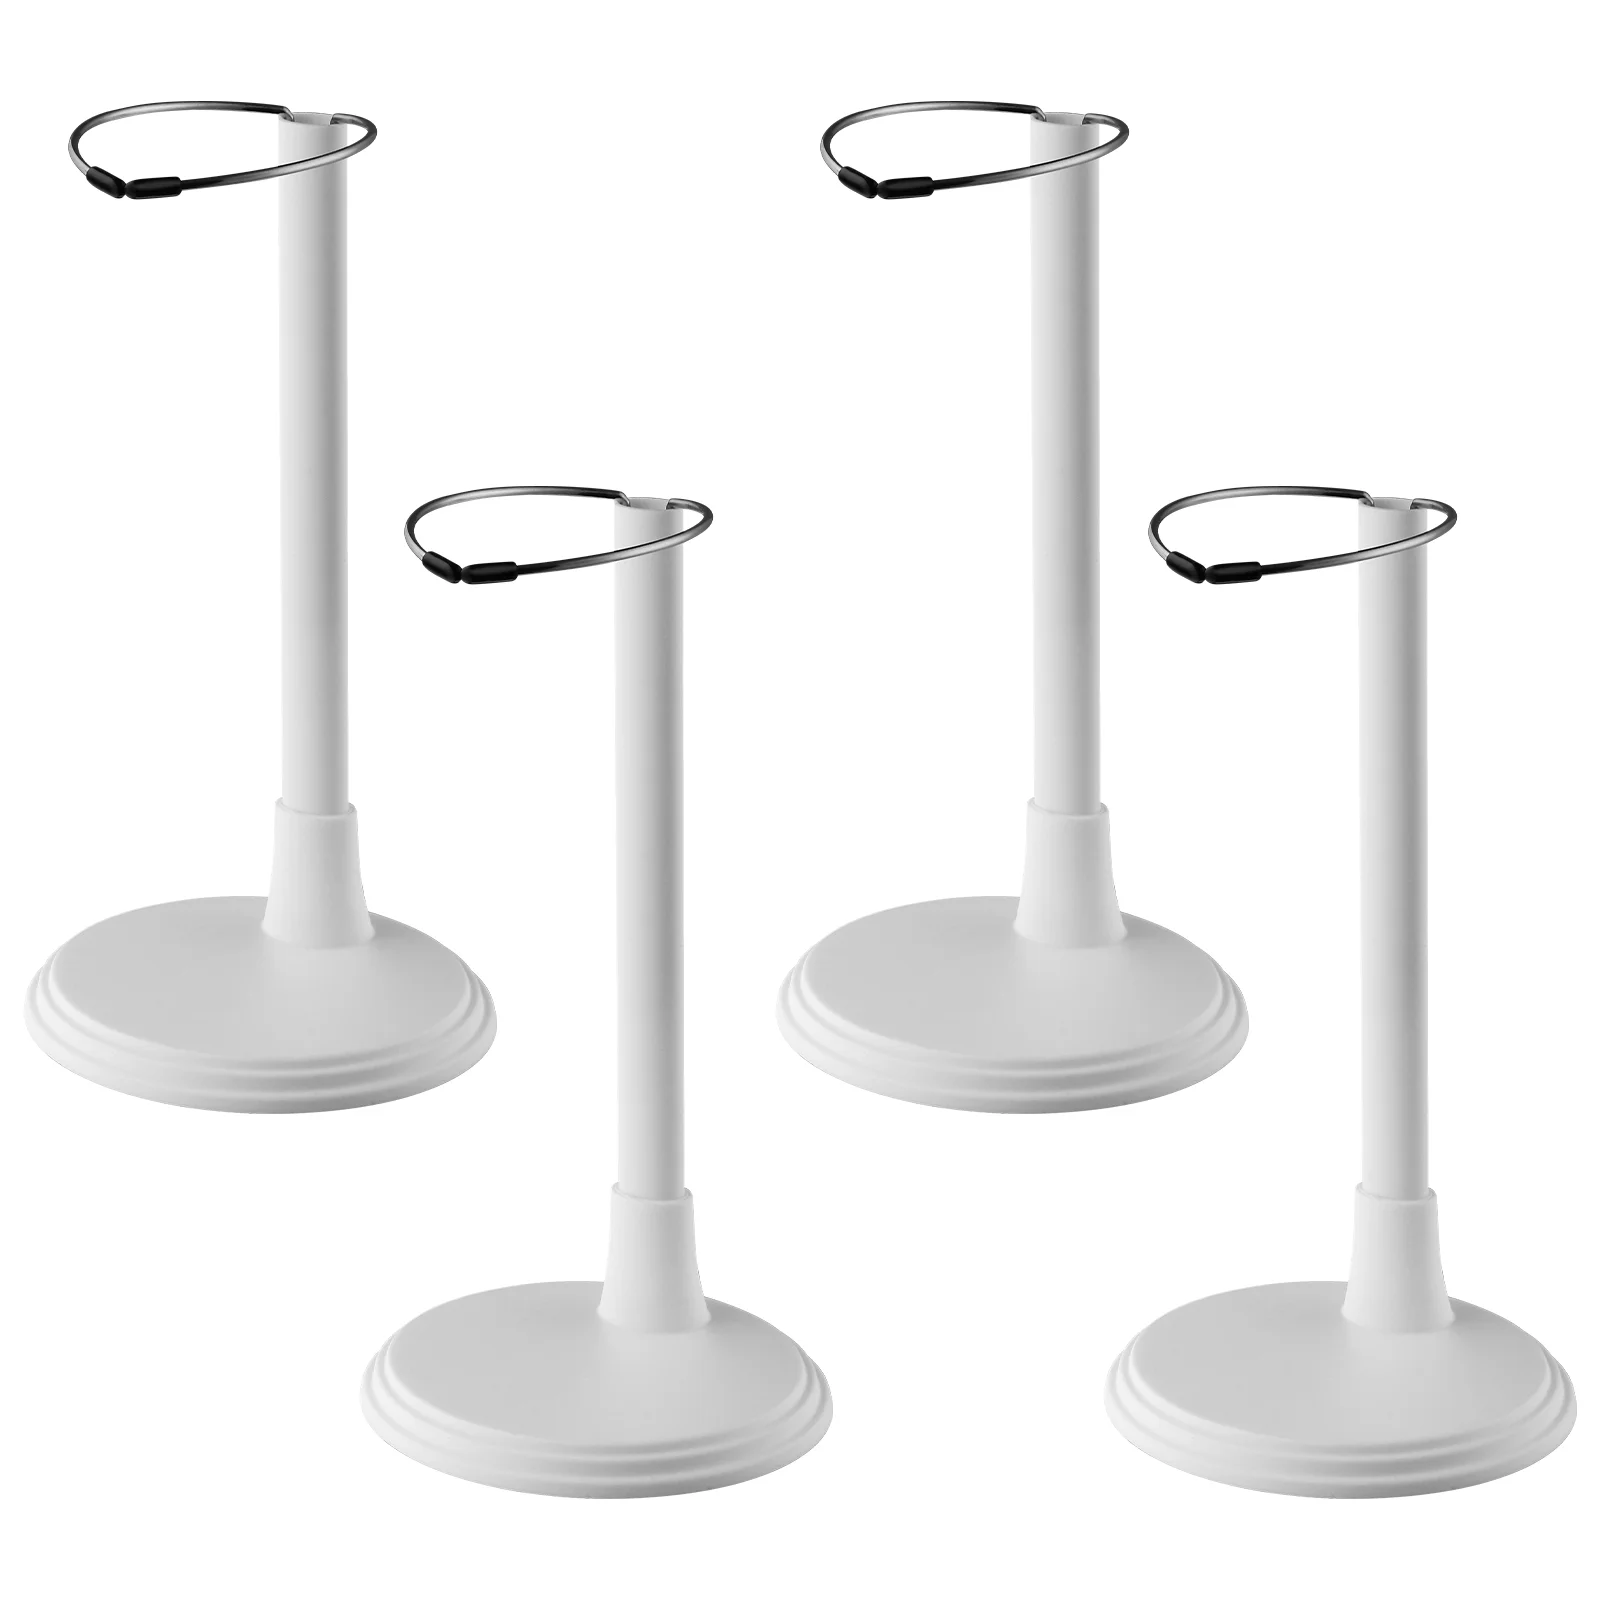 

Support Frames Toy Cabbage Figures Stand Standing Rack Holders Racks Supporting Models